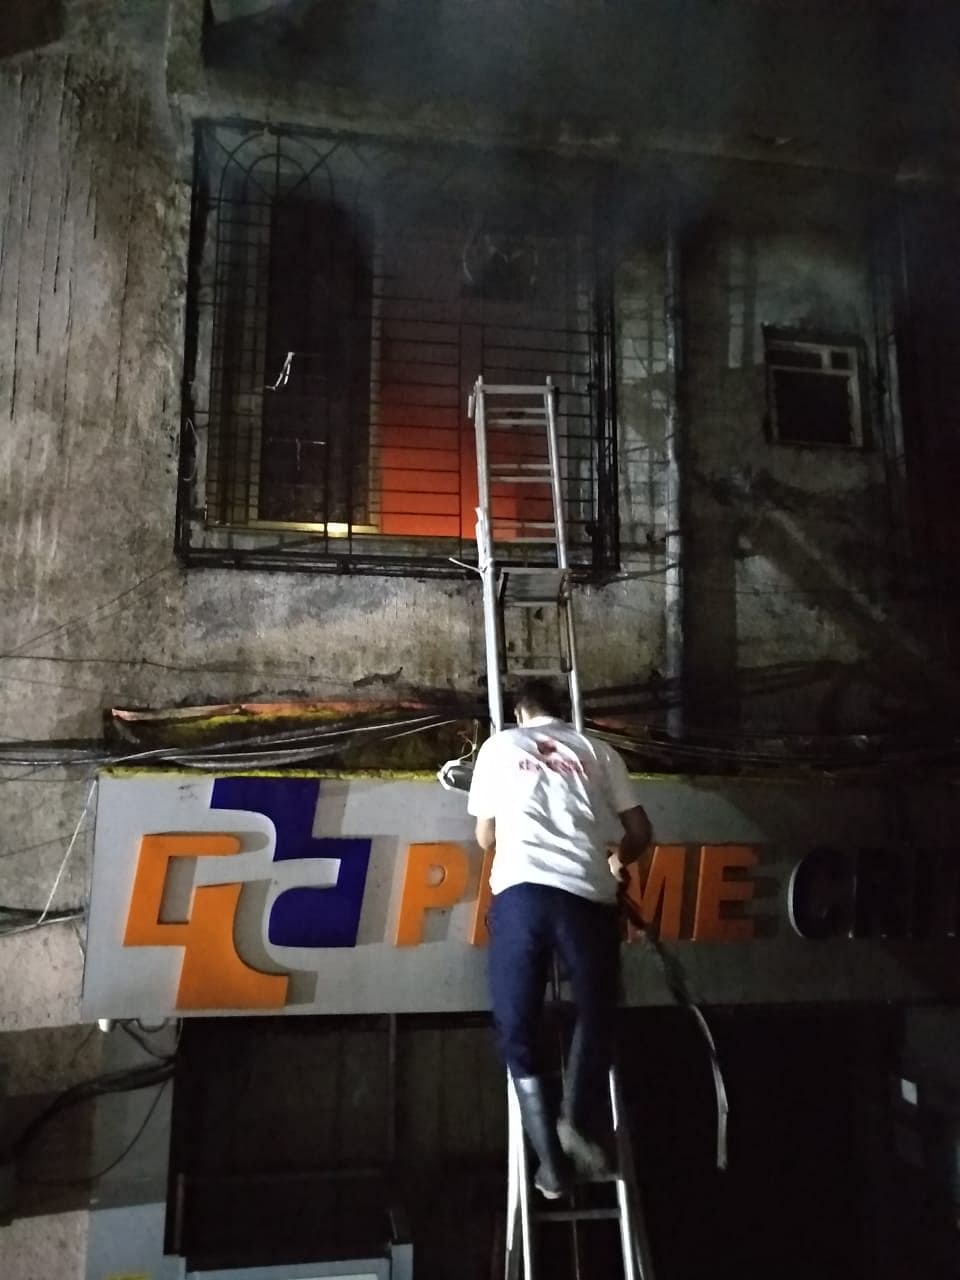 Thane Municipal Corporation officials told ANI that two fire engines and one rescue vehicle were on site.